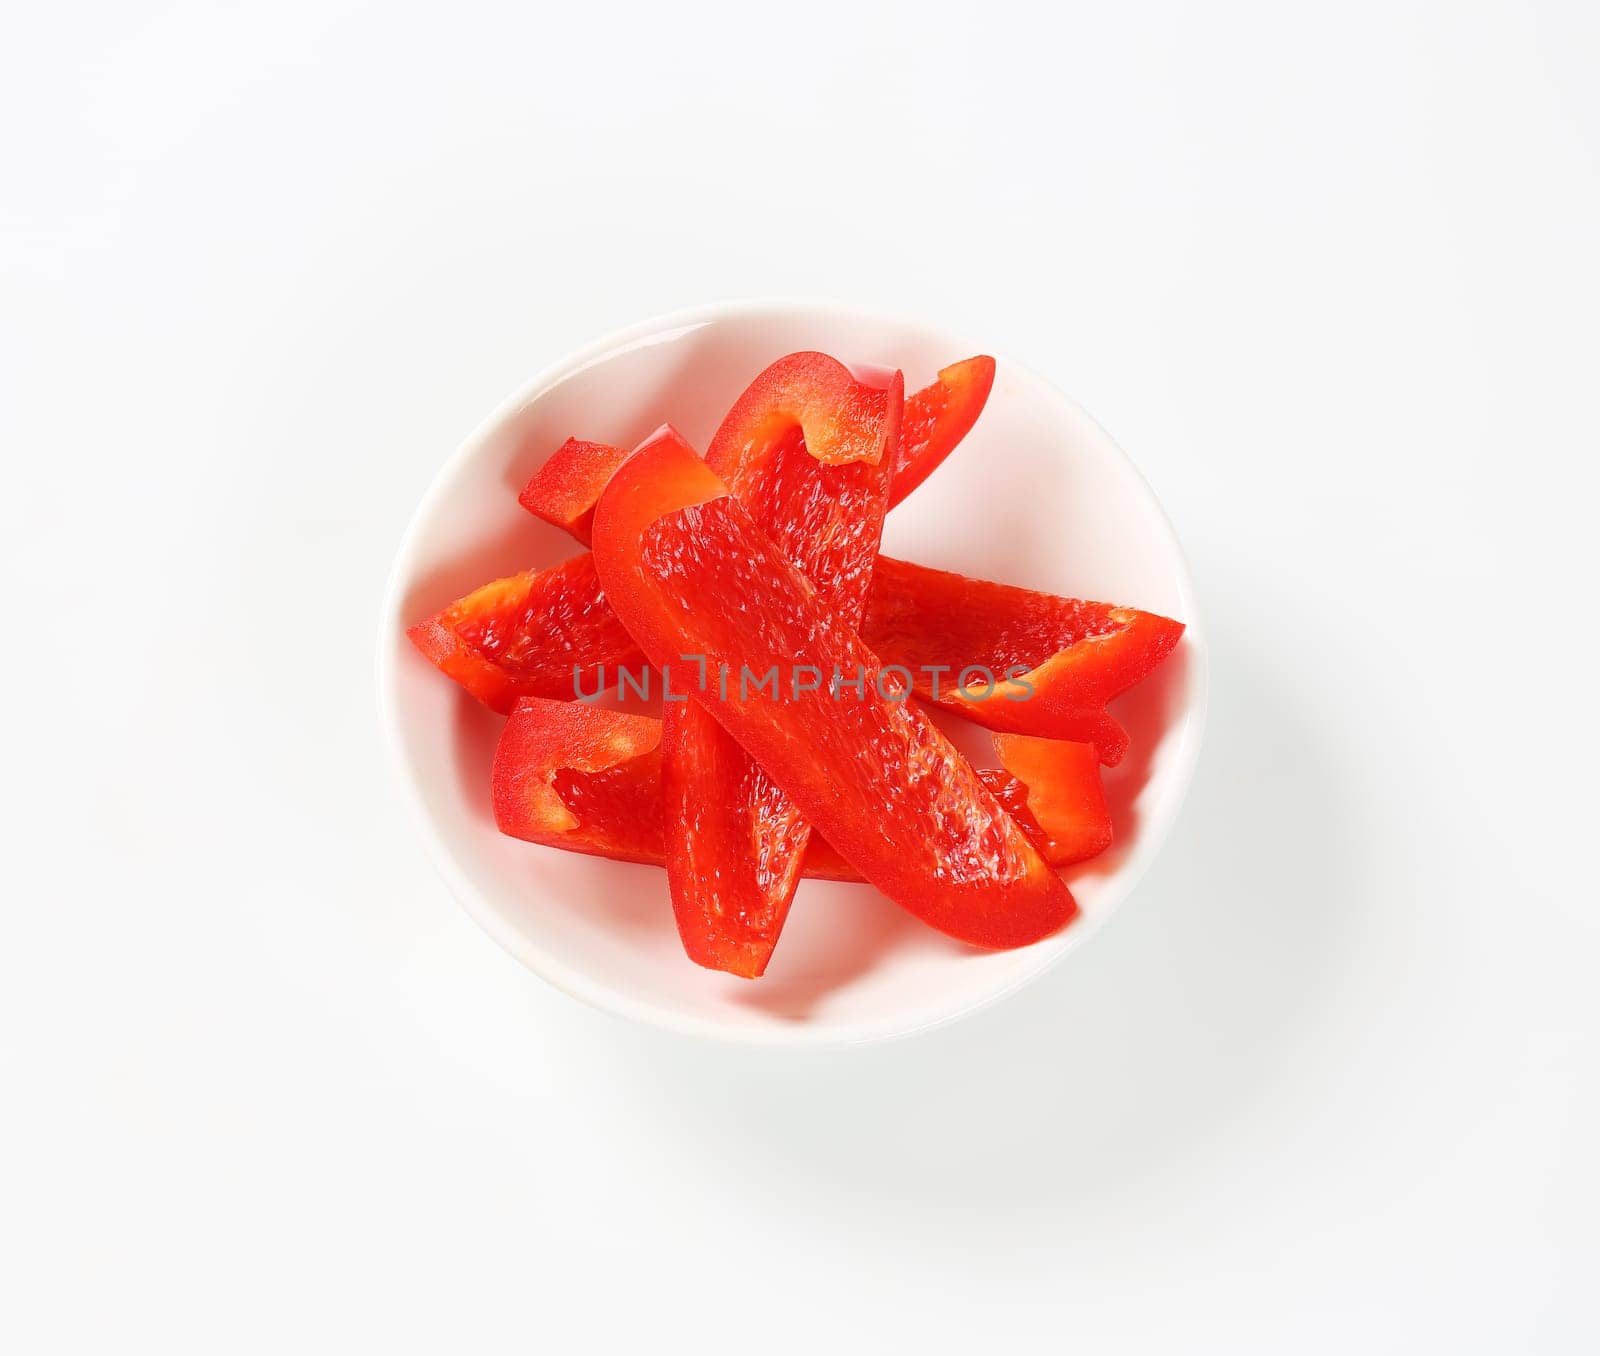 Slices of red bell pepper by Digifoodstock